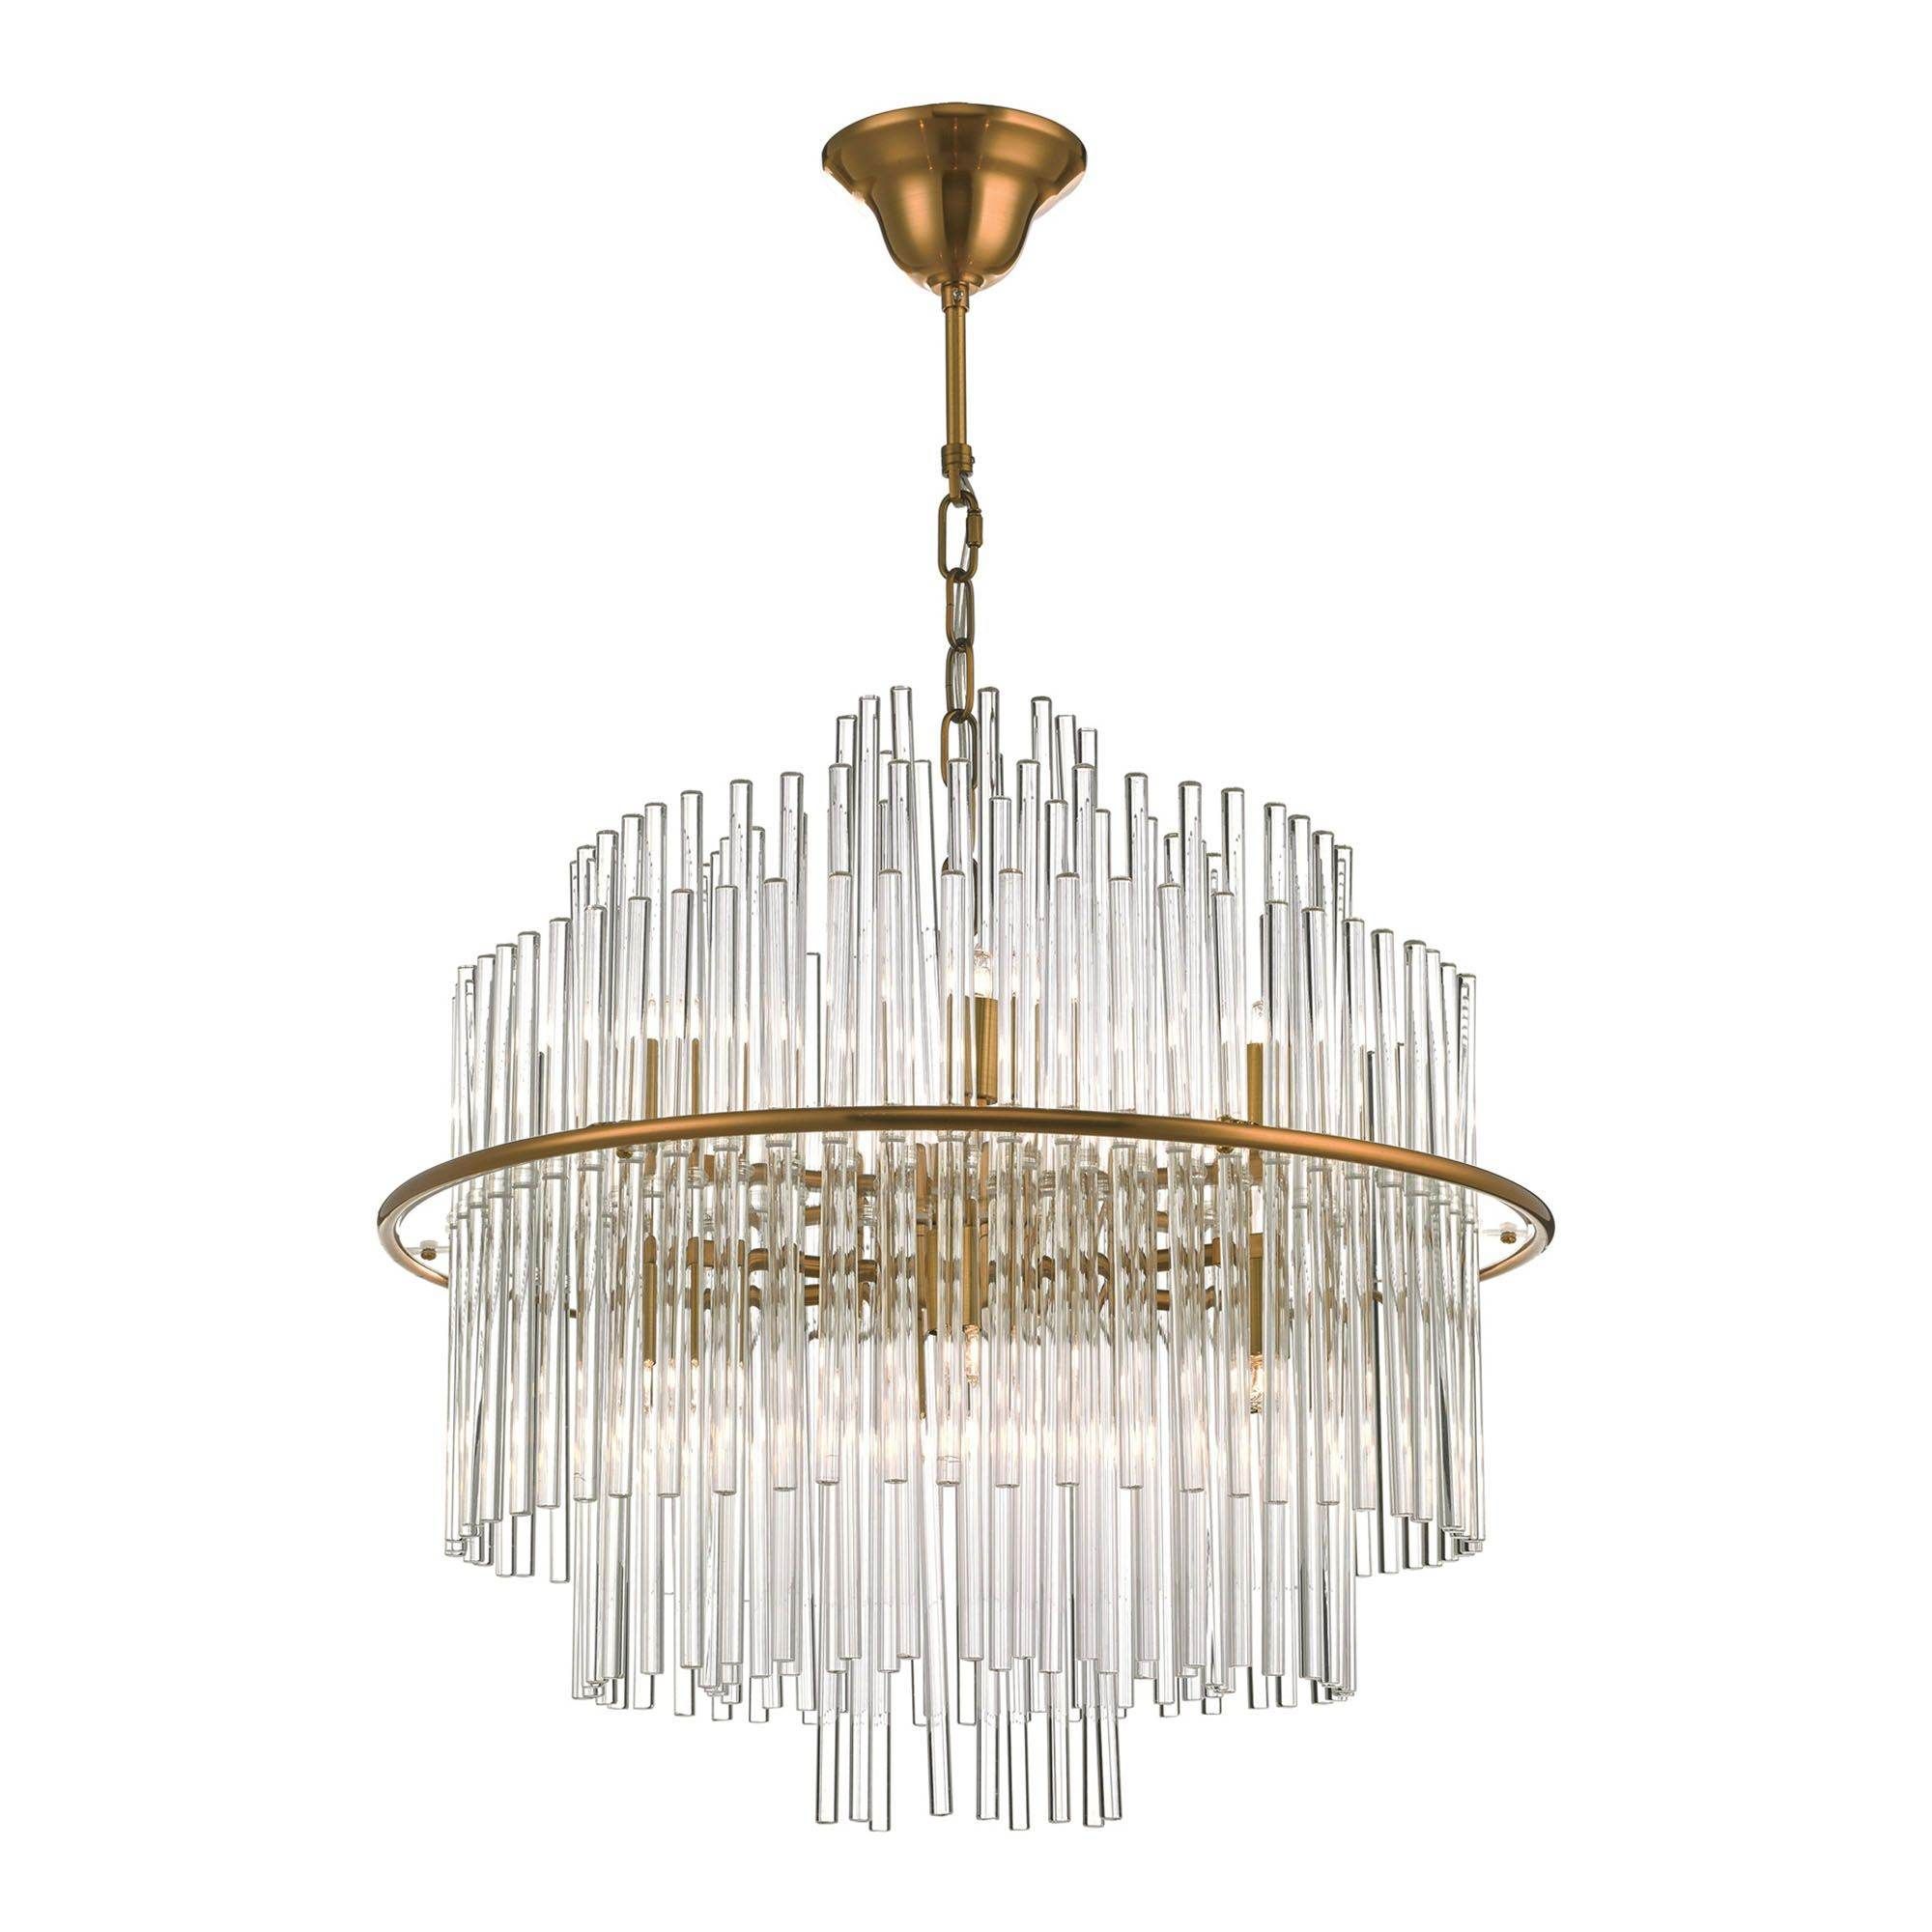 Dar Lukas 13 Light Fitting Brushed Antique Gold And Clear Glass/Pendant Polished Chrome Glass - Cusack Lighting